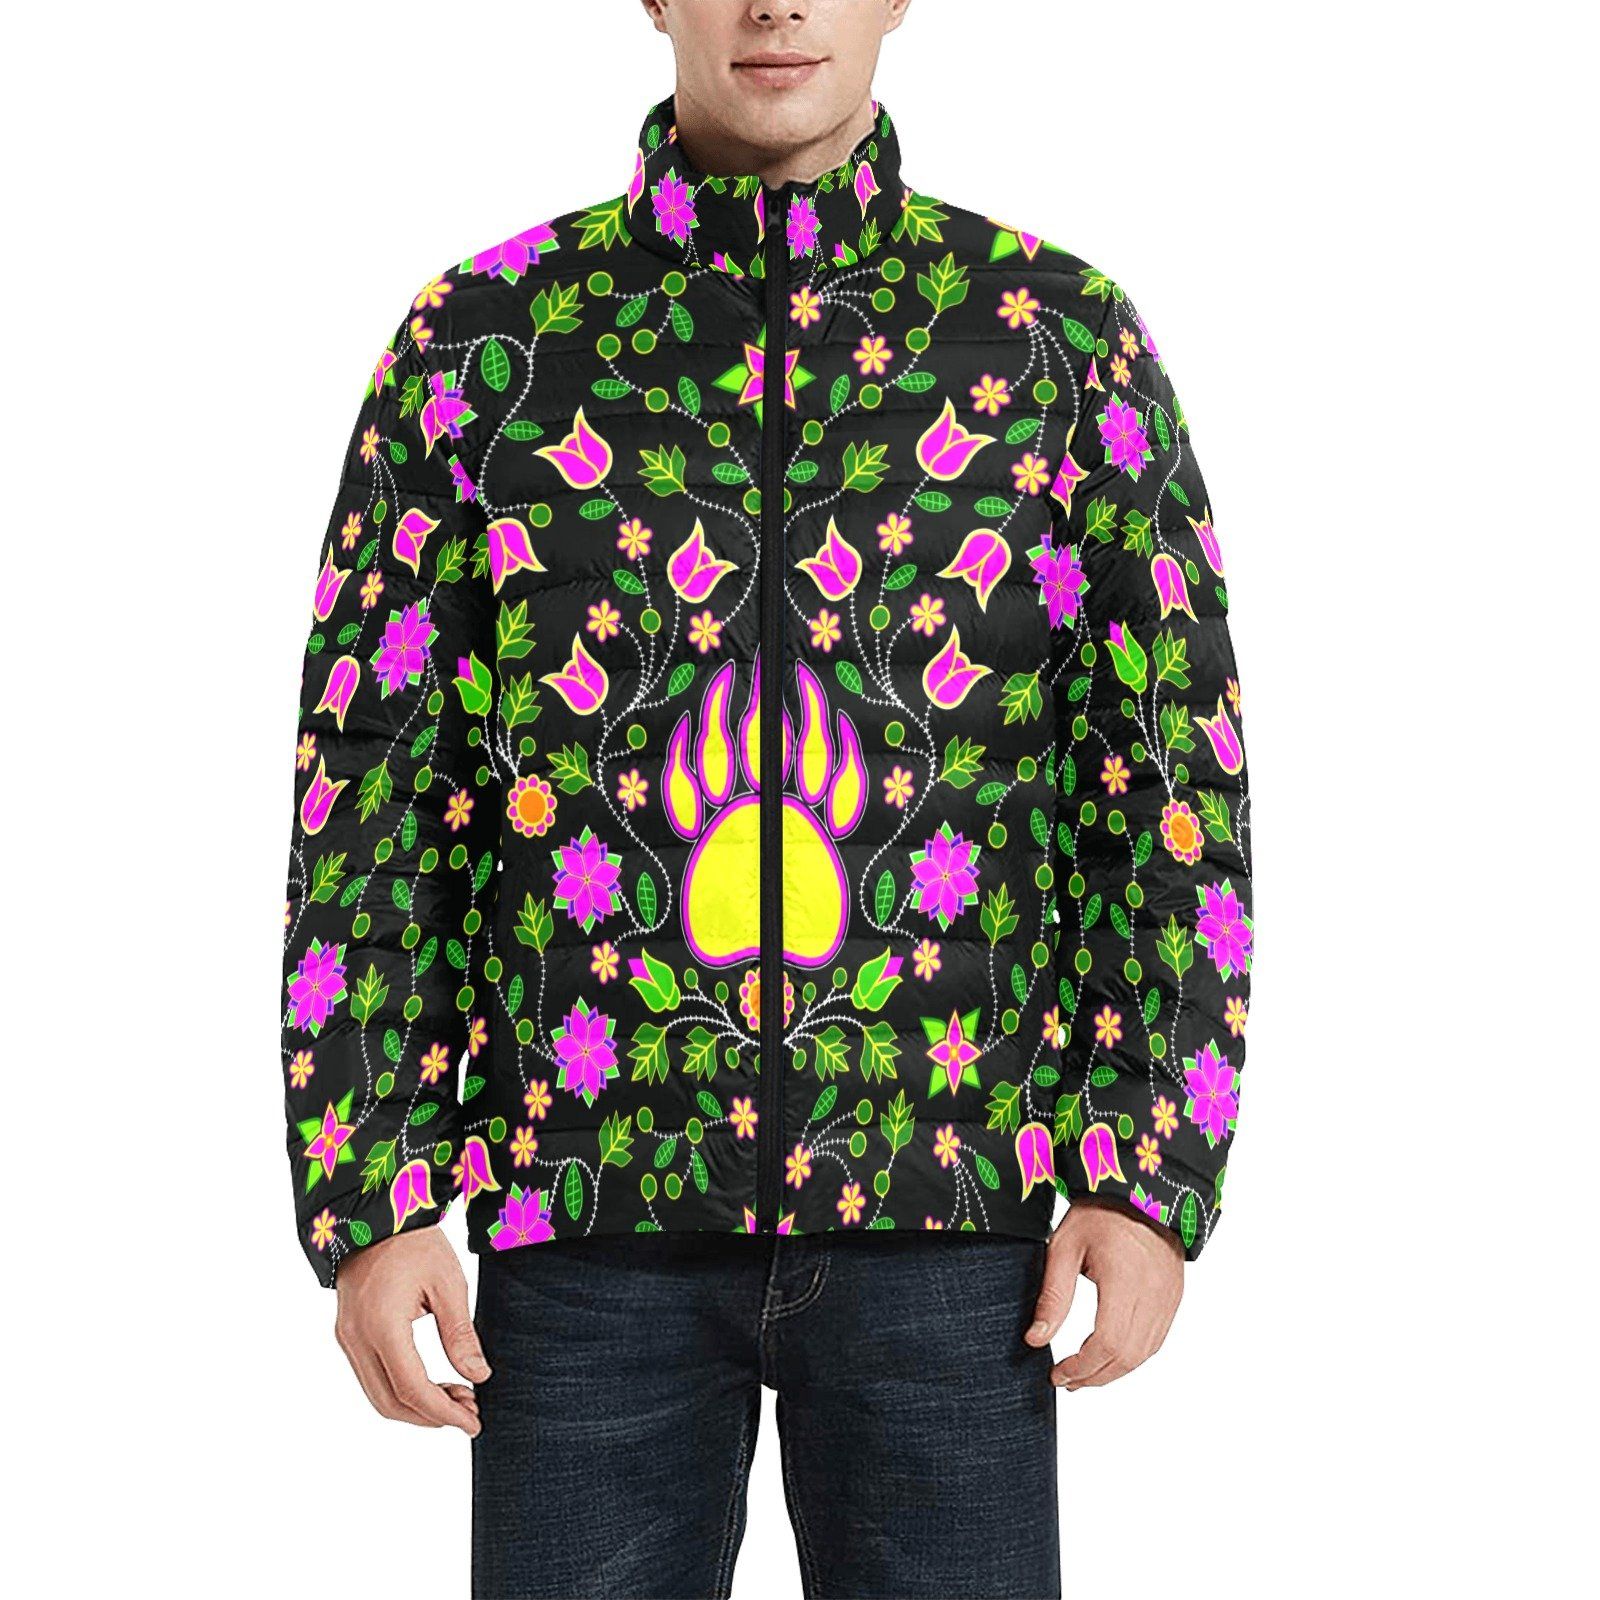 Floral Bearpaw Pink and Yellow Men's Stand Collar Padded Jacket (Model H41) Men's Stand Collar Padded Jacket (H41) e-joyer 